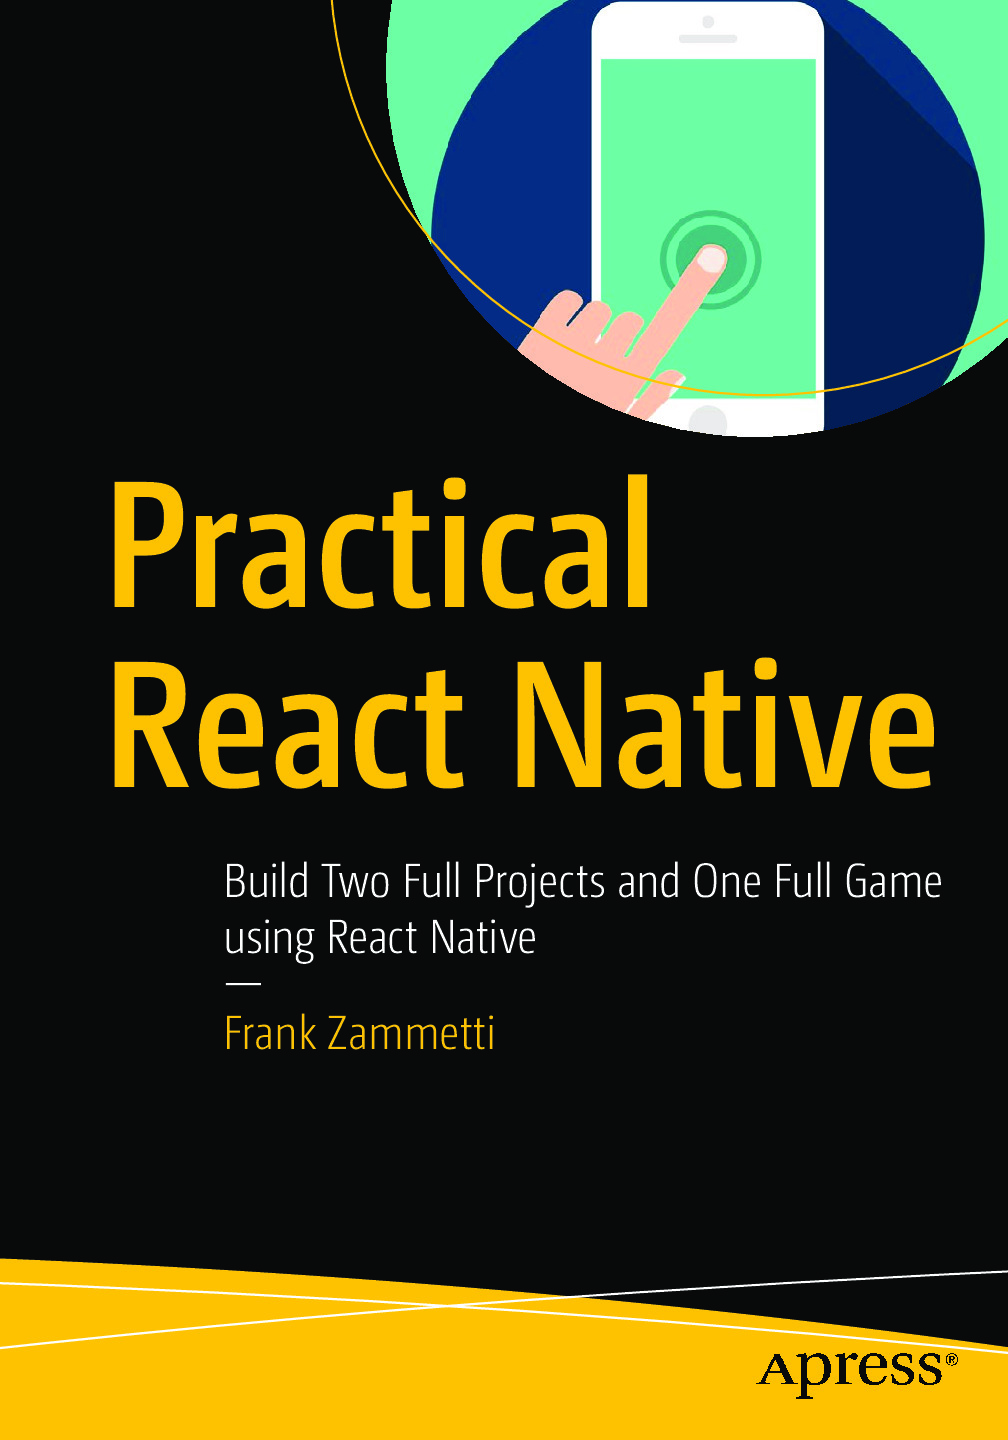 Practical React Native_ Build Two Full Projects and One Full Game Using React Native